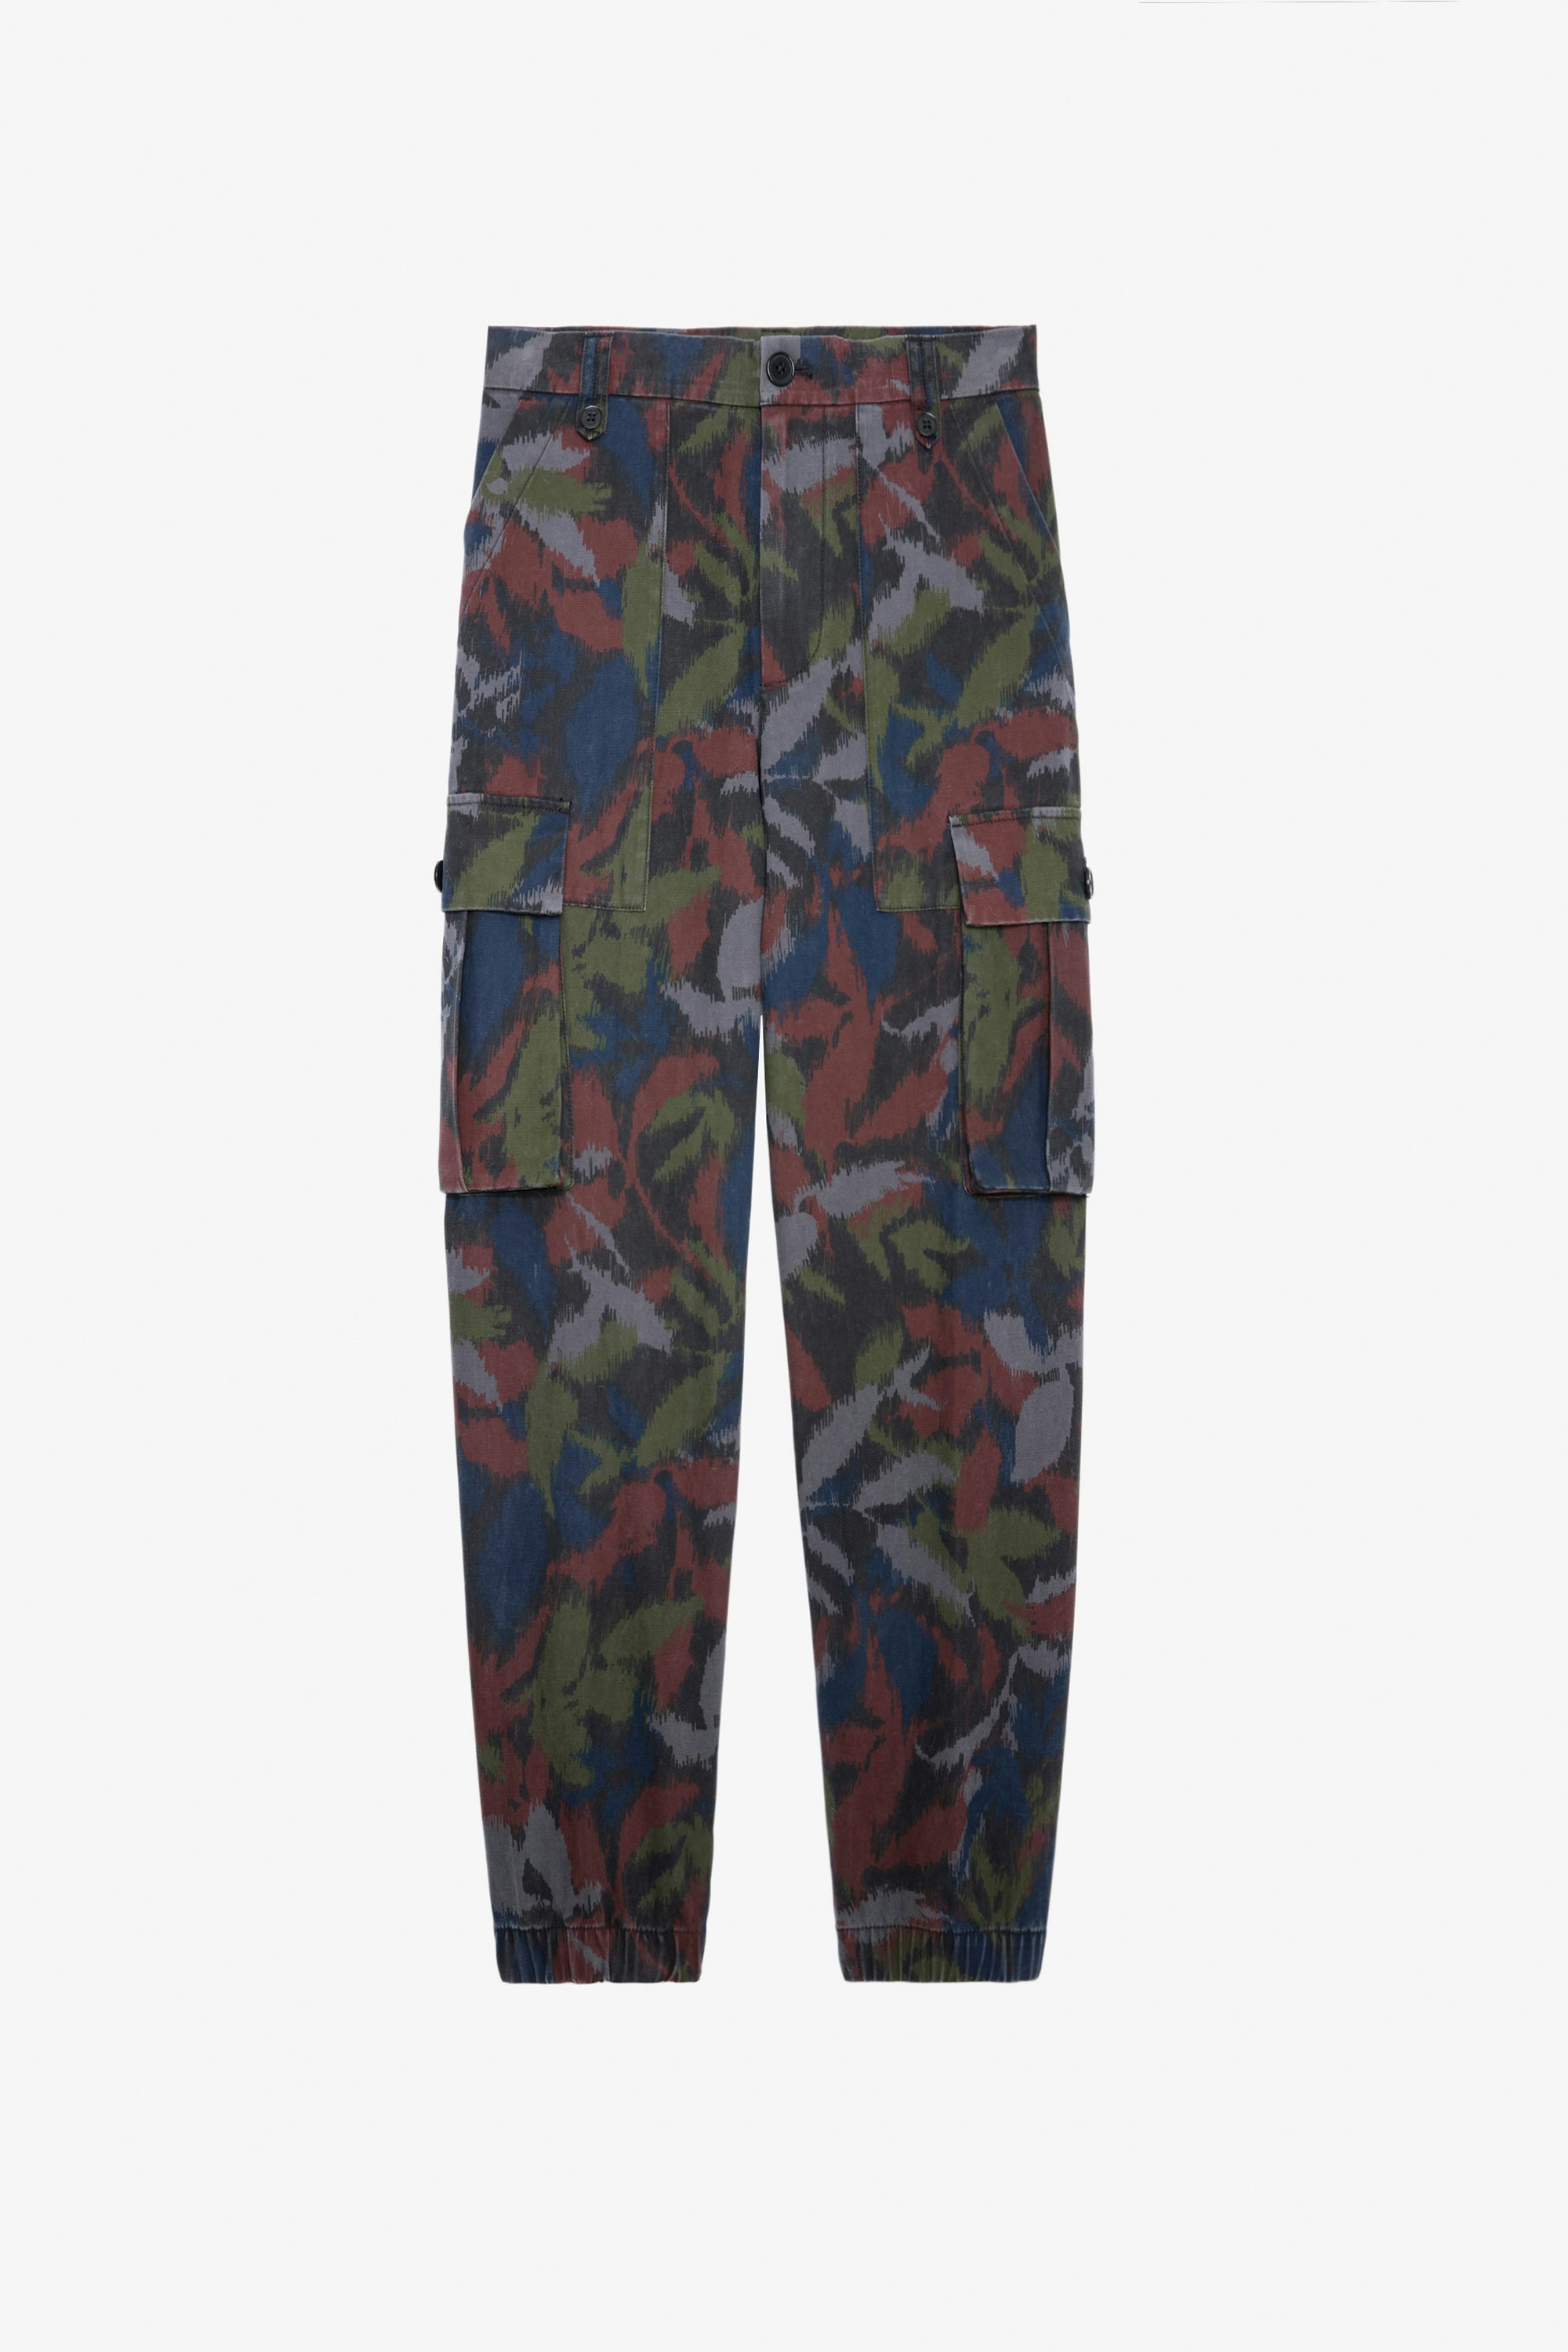 Pilote Pants - Women’s black cotton military-style pants with print and pockets.